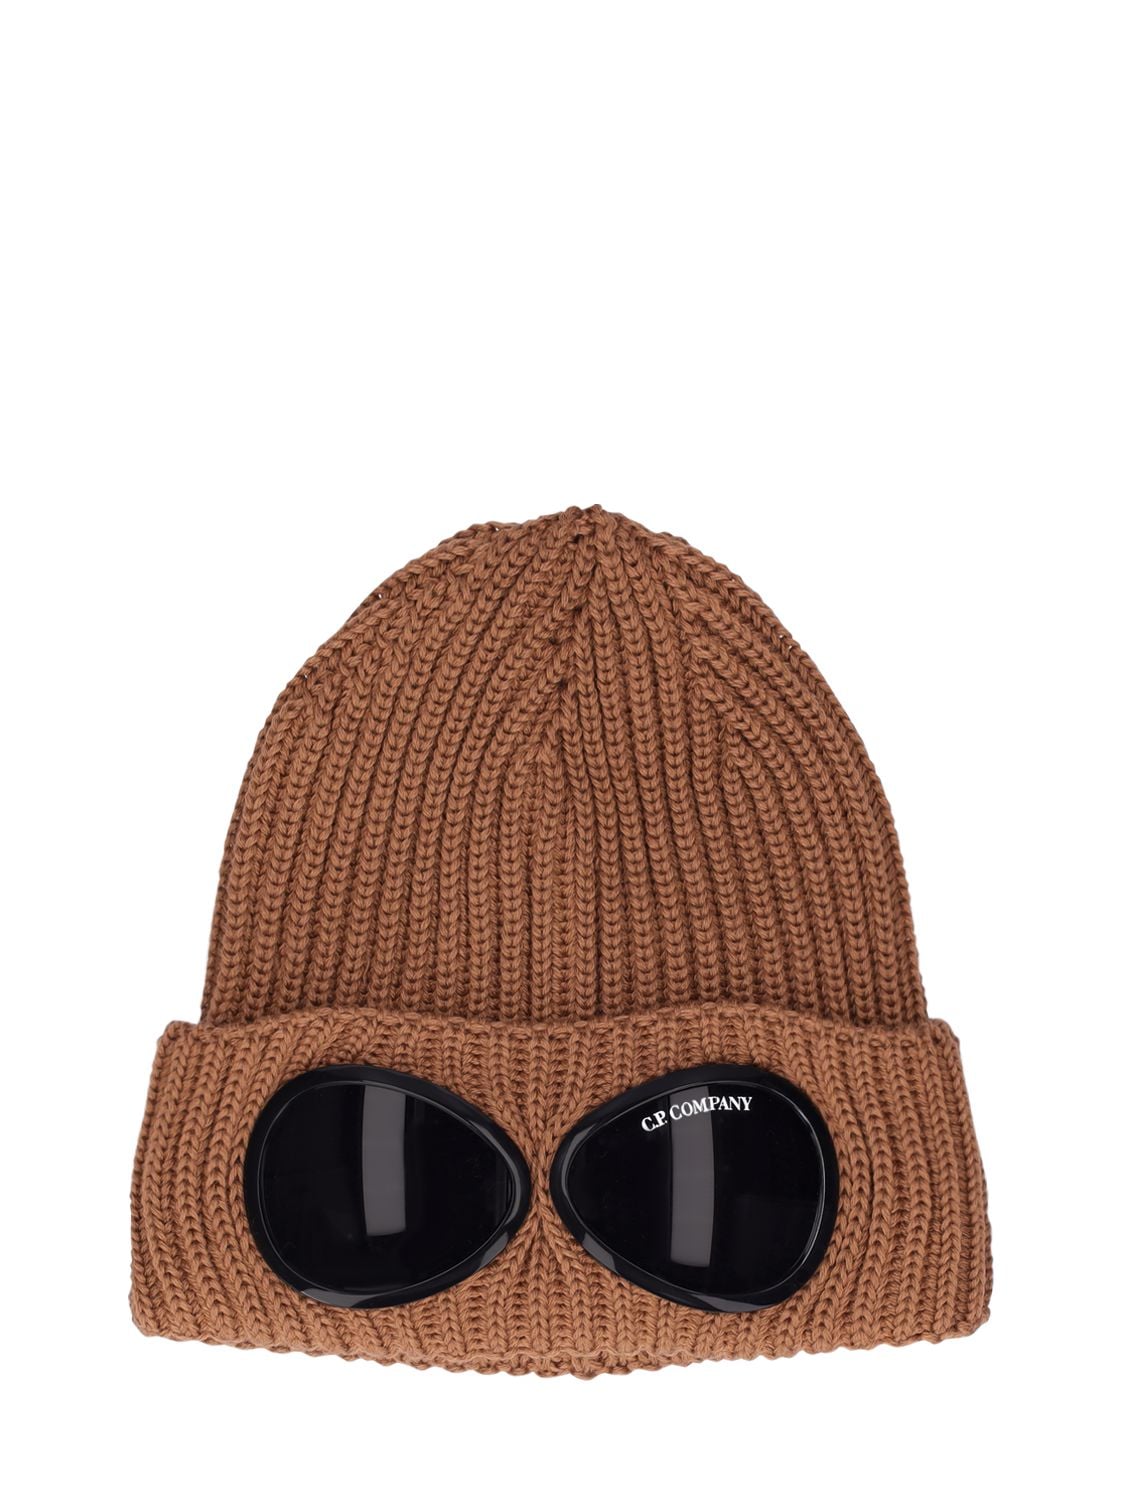 C.p. Company Knit Wool Beanie W/ Decorative Goggles In Brown